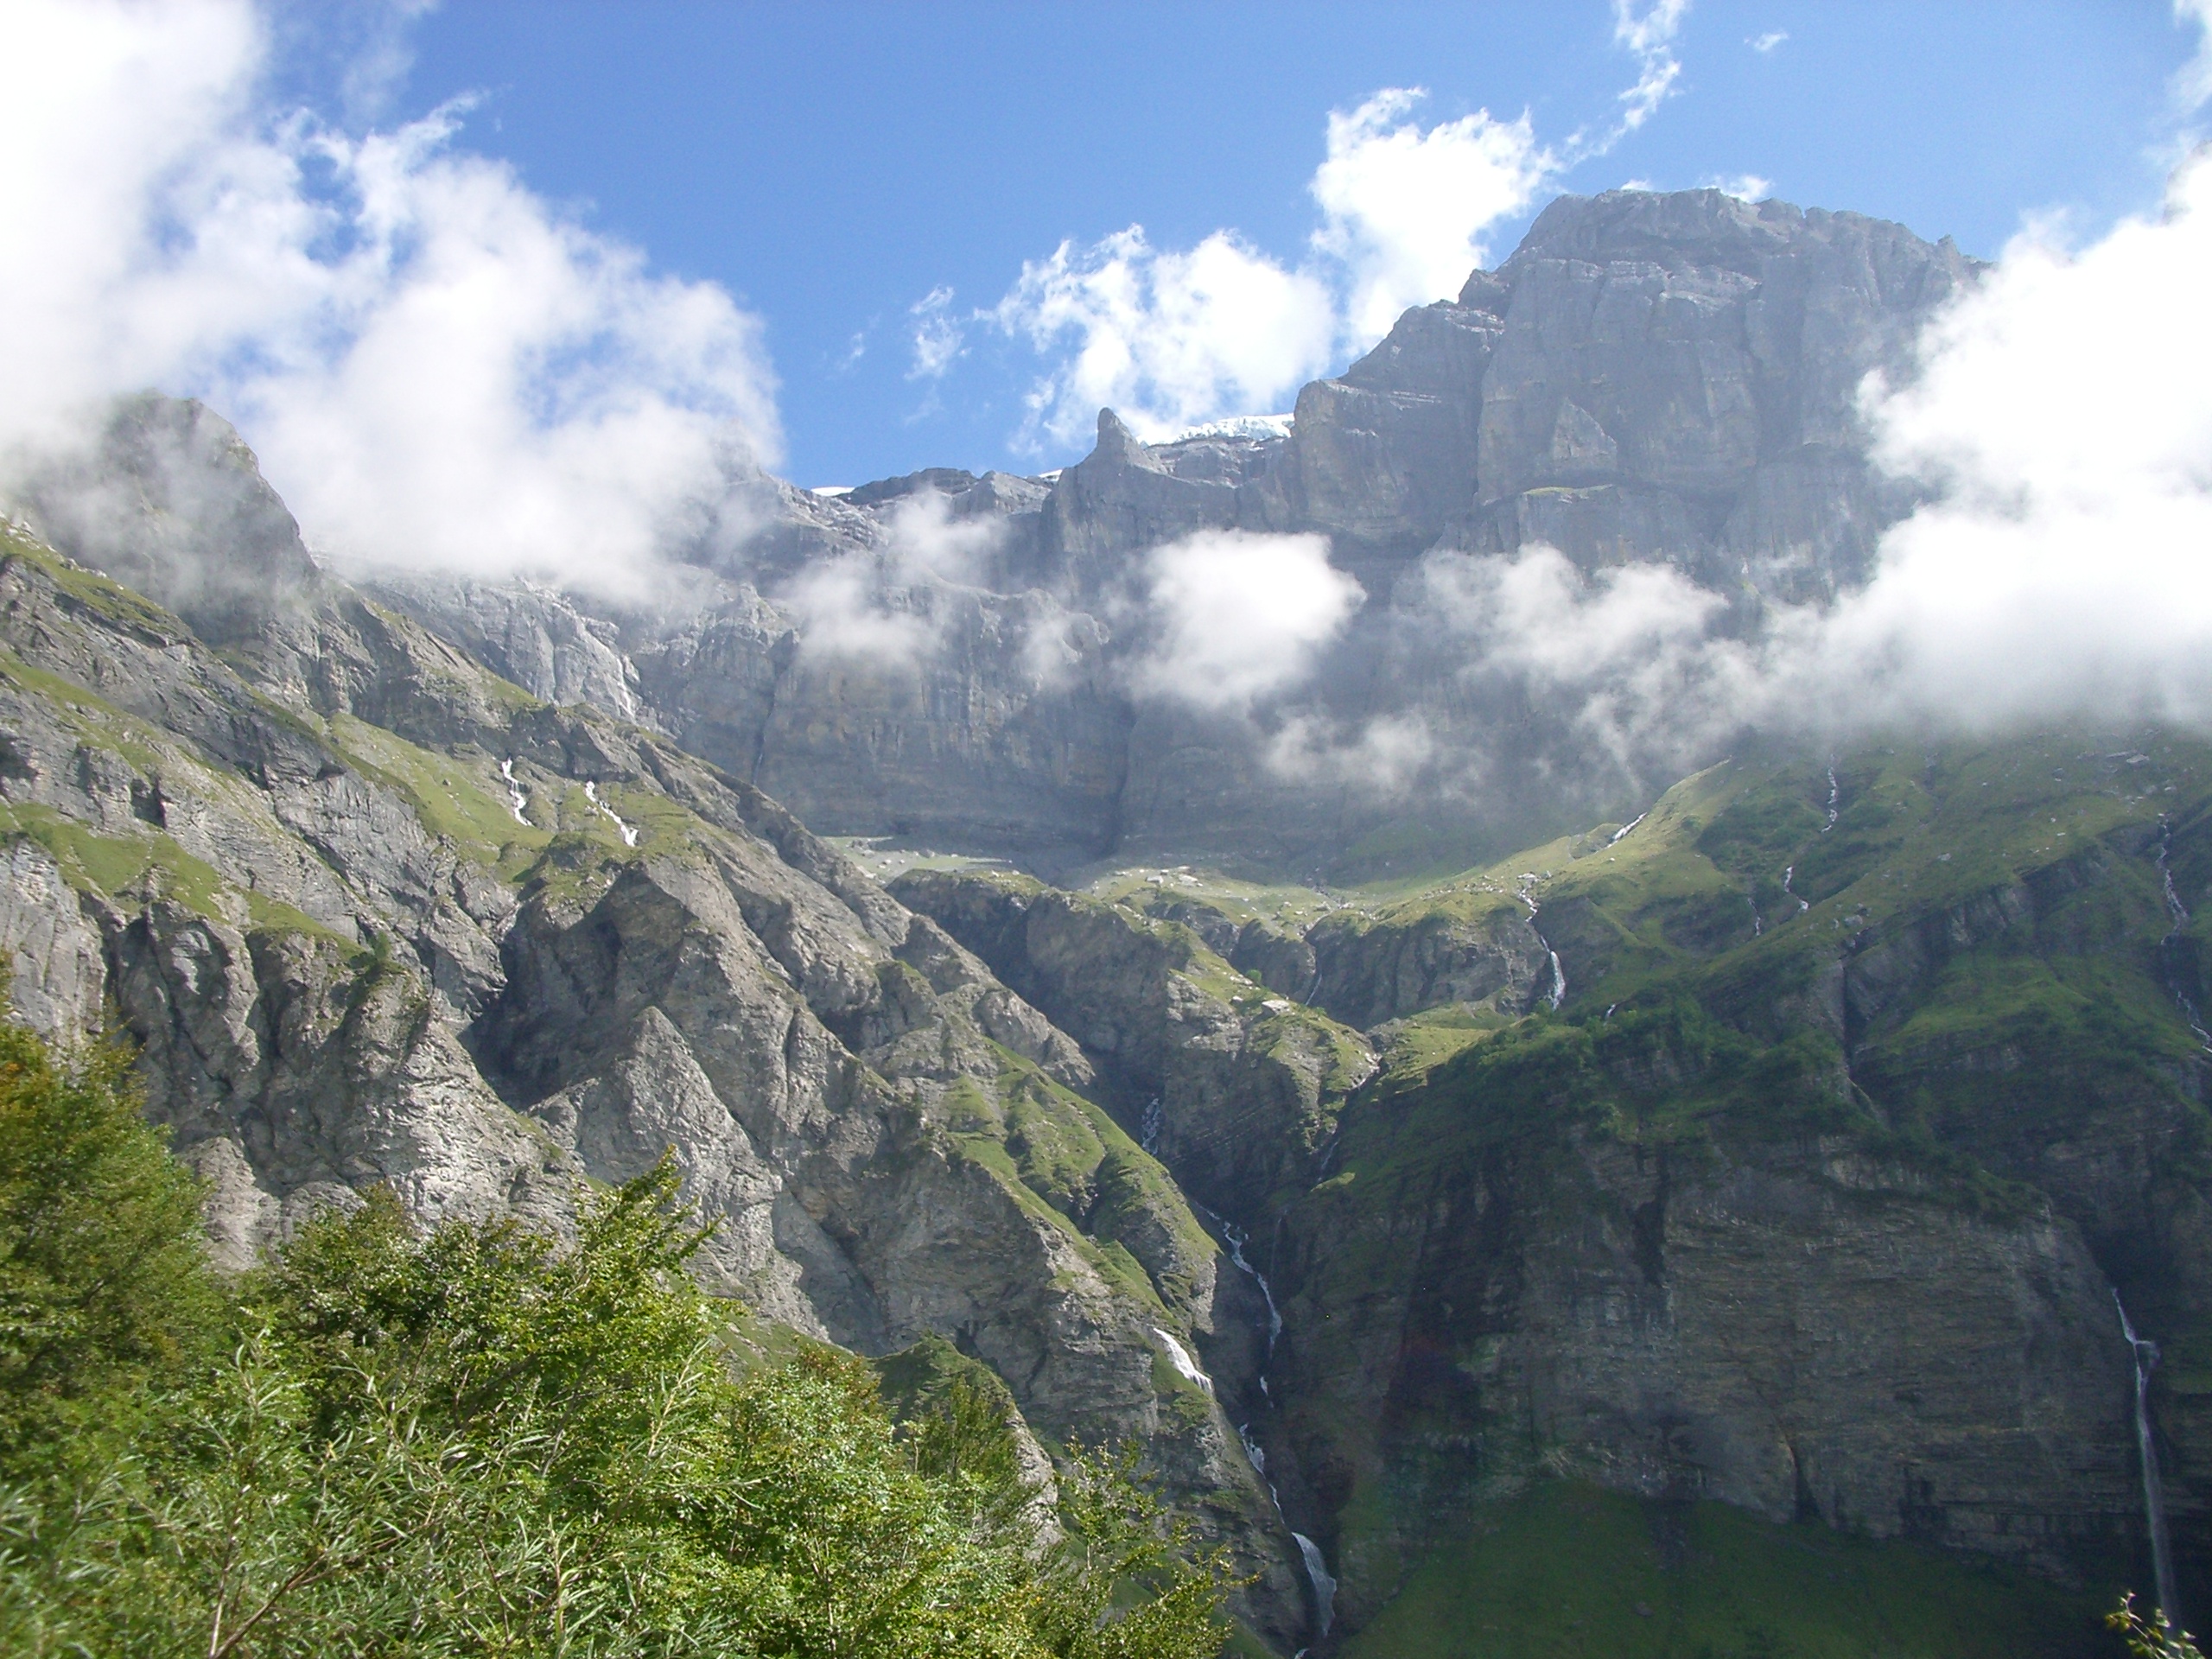 Waterfalls from the Glaciers of Sixt Fer a Cheval, Samoens